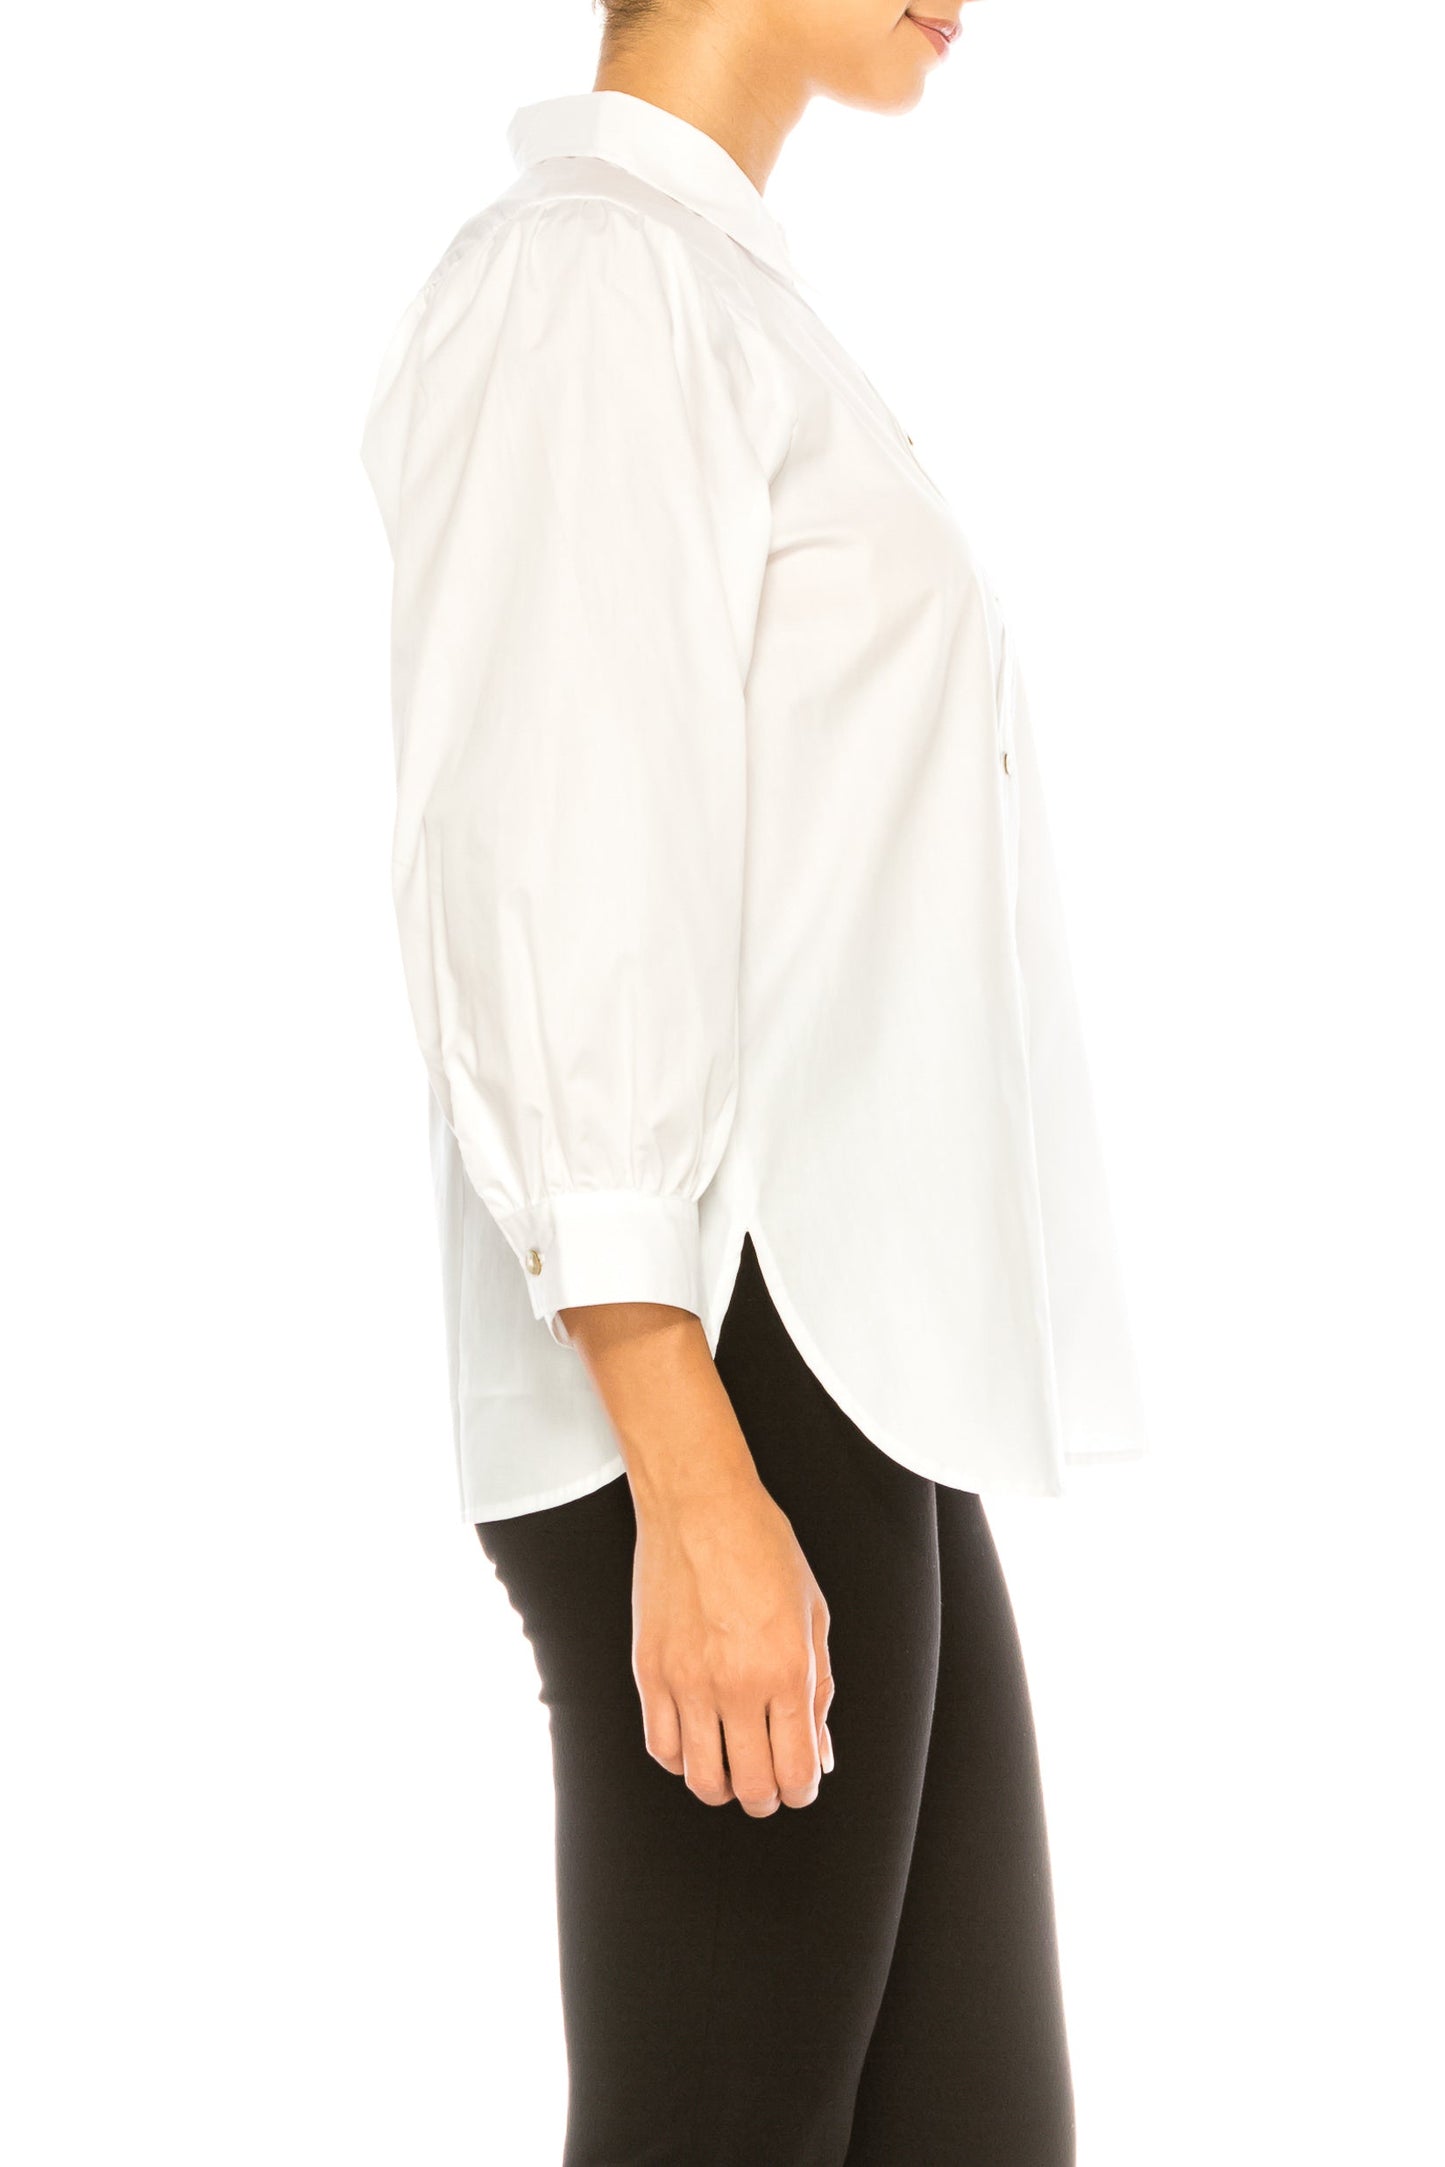 Hester & Orchid White Button Up Collared Top